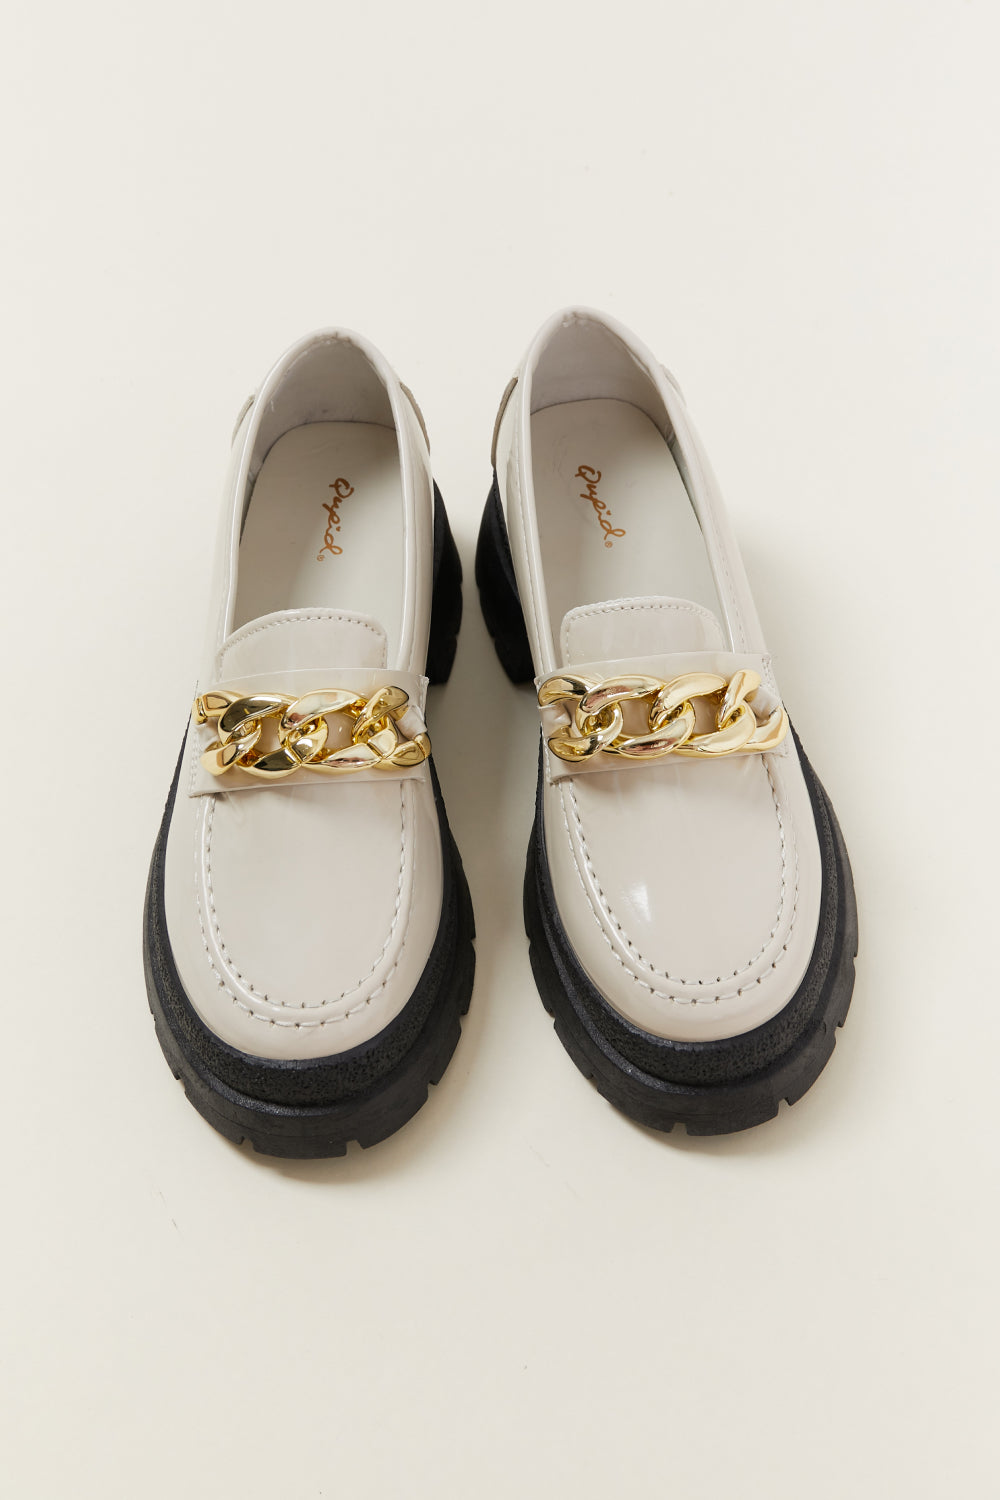 Qupid Start the Day Right Platform Oxford Loafers